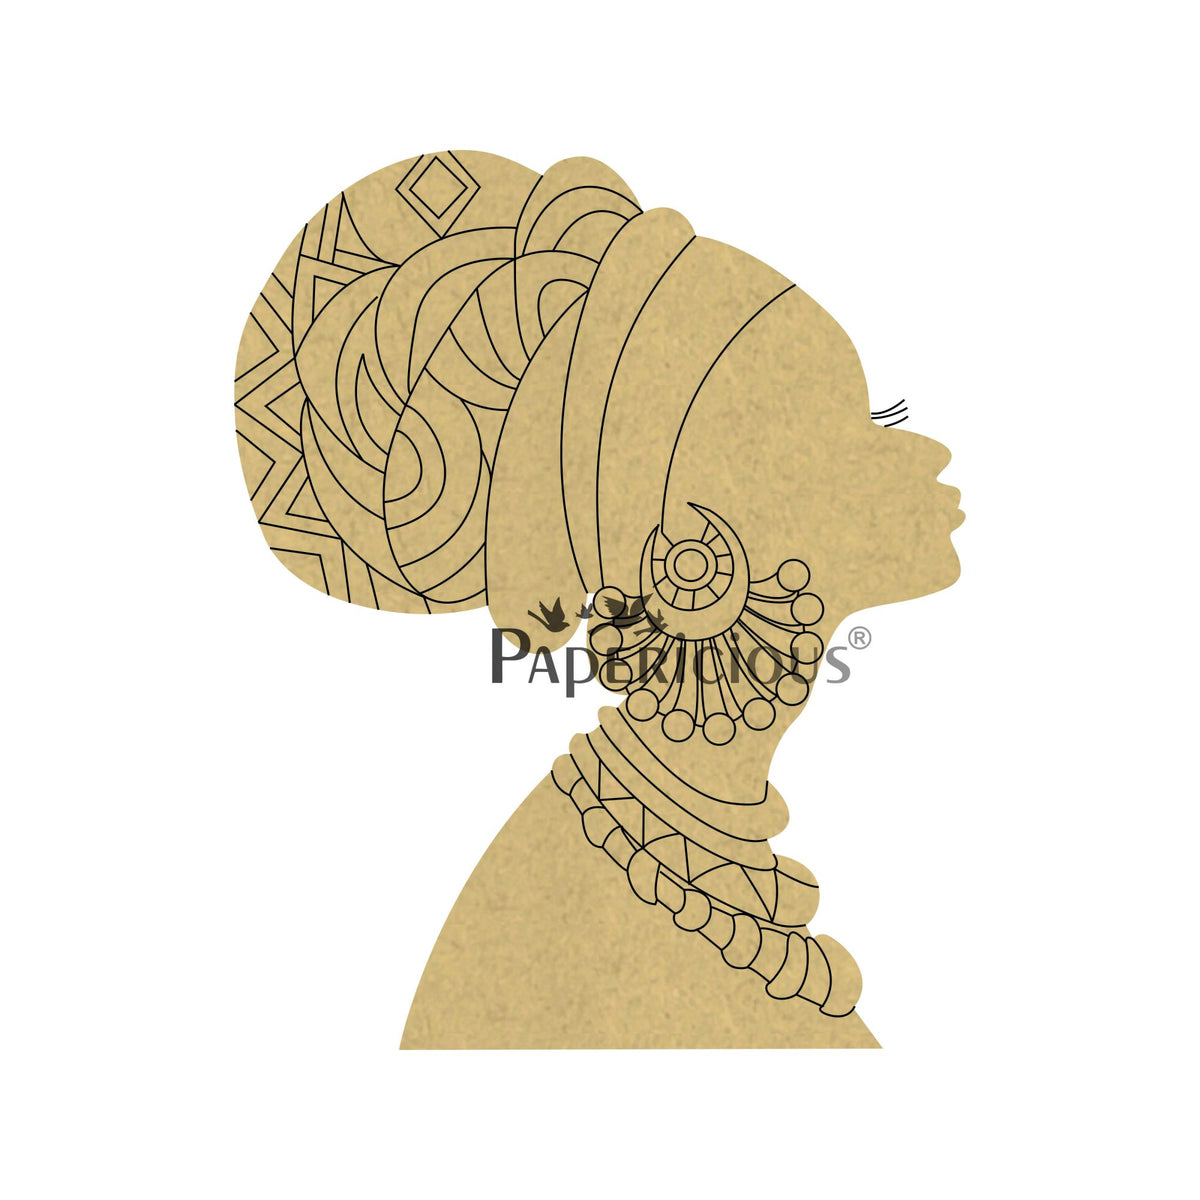 PAPERICIOUS 4mm thick Pre Marked MDF Beauty Queen